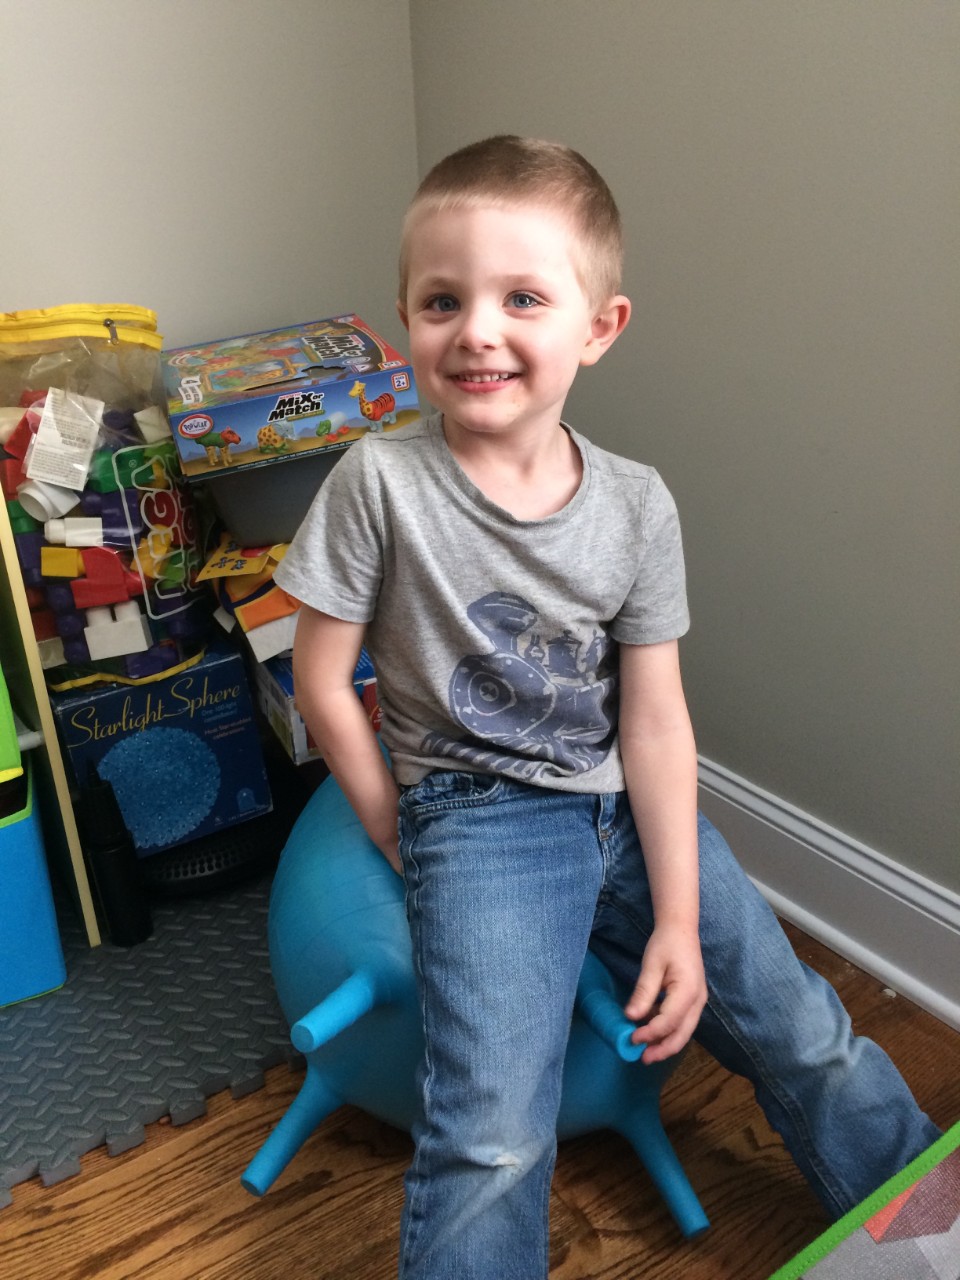 a smiling young blonde boy in a gray t-shirt, sitting on the blue yoga ball with toys and puzzles behind him